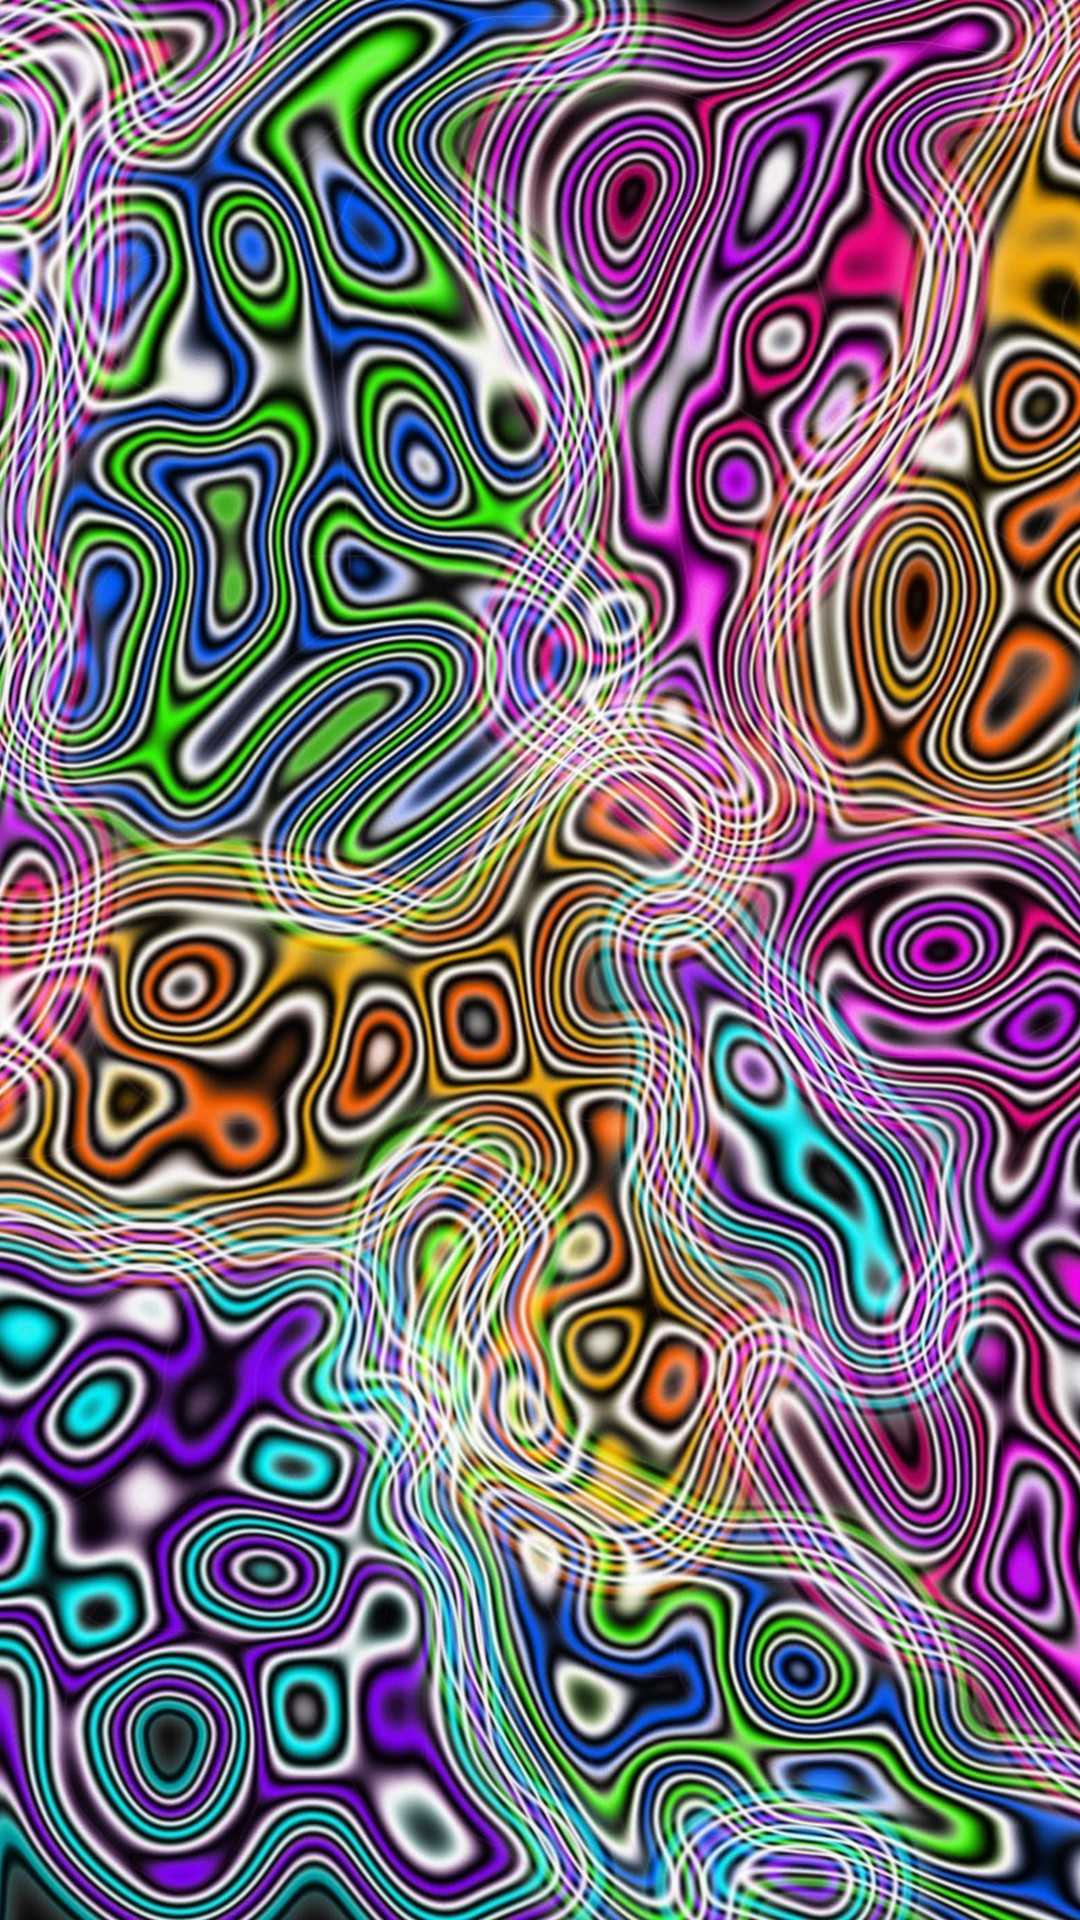 A colorful abstract pattern with many different shapes - Trippy